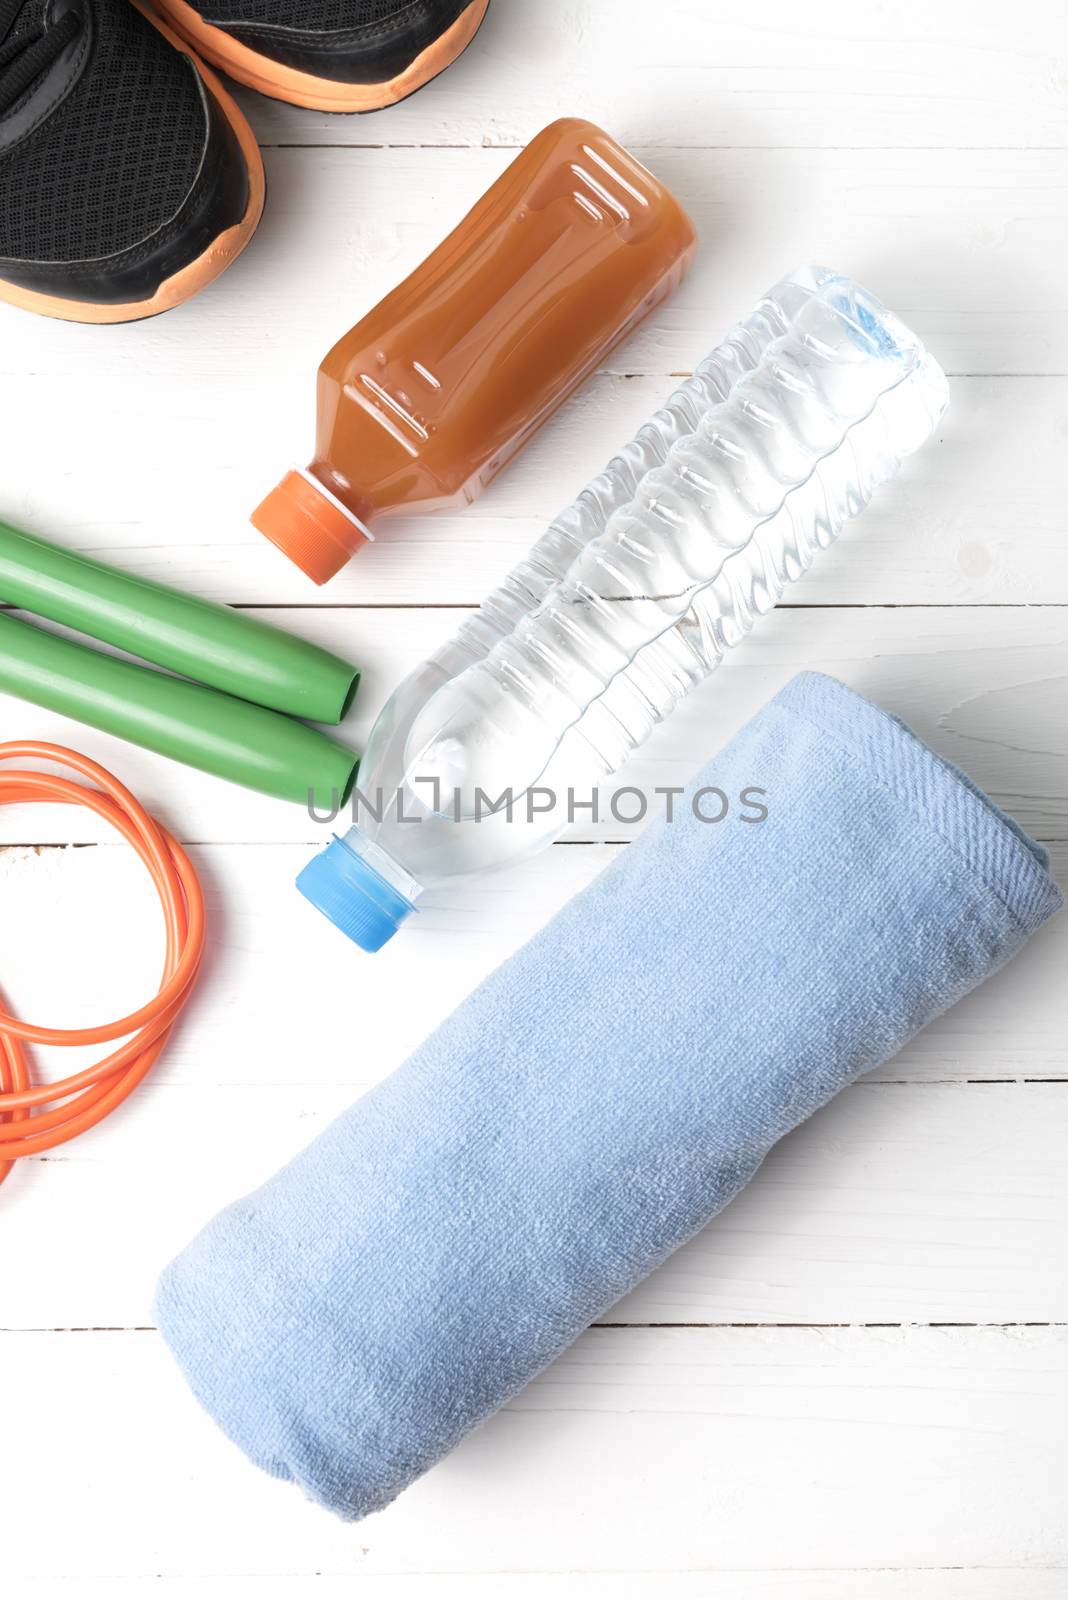 fitness equipment : running shoes,towel,jumping rope,drinking water and orange juice on white wood background